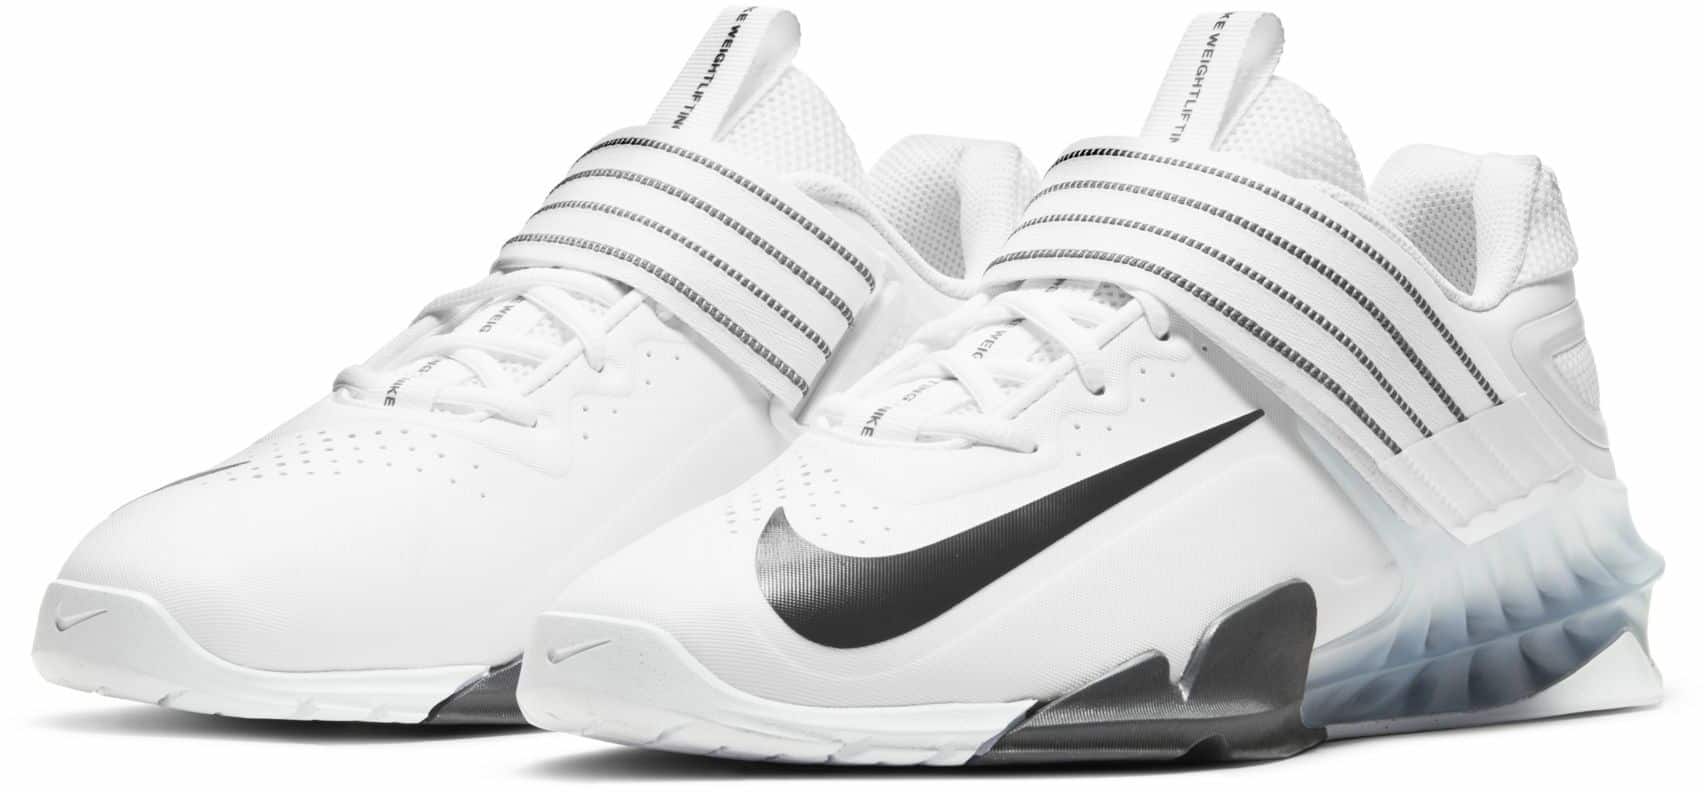 new nike weightlifting shoes